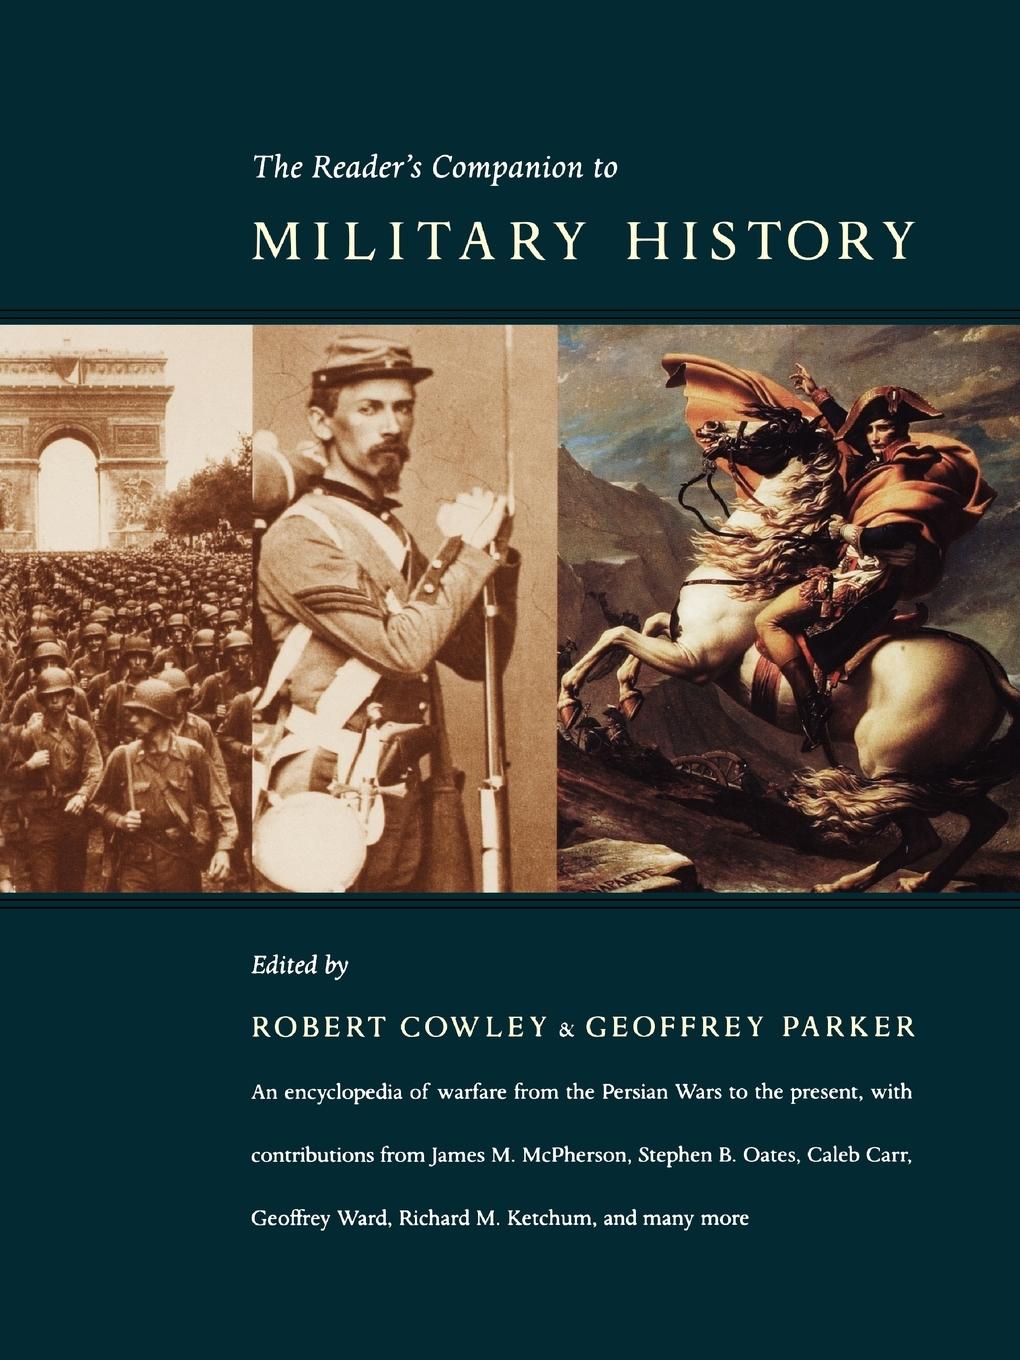 The Reader s Companion to Military History - Cowley, Robert Parker, Geoffrey